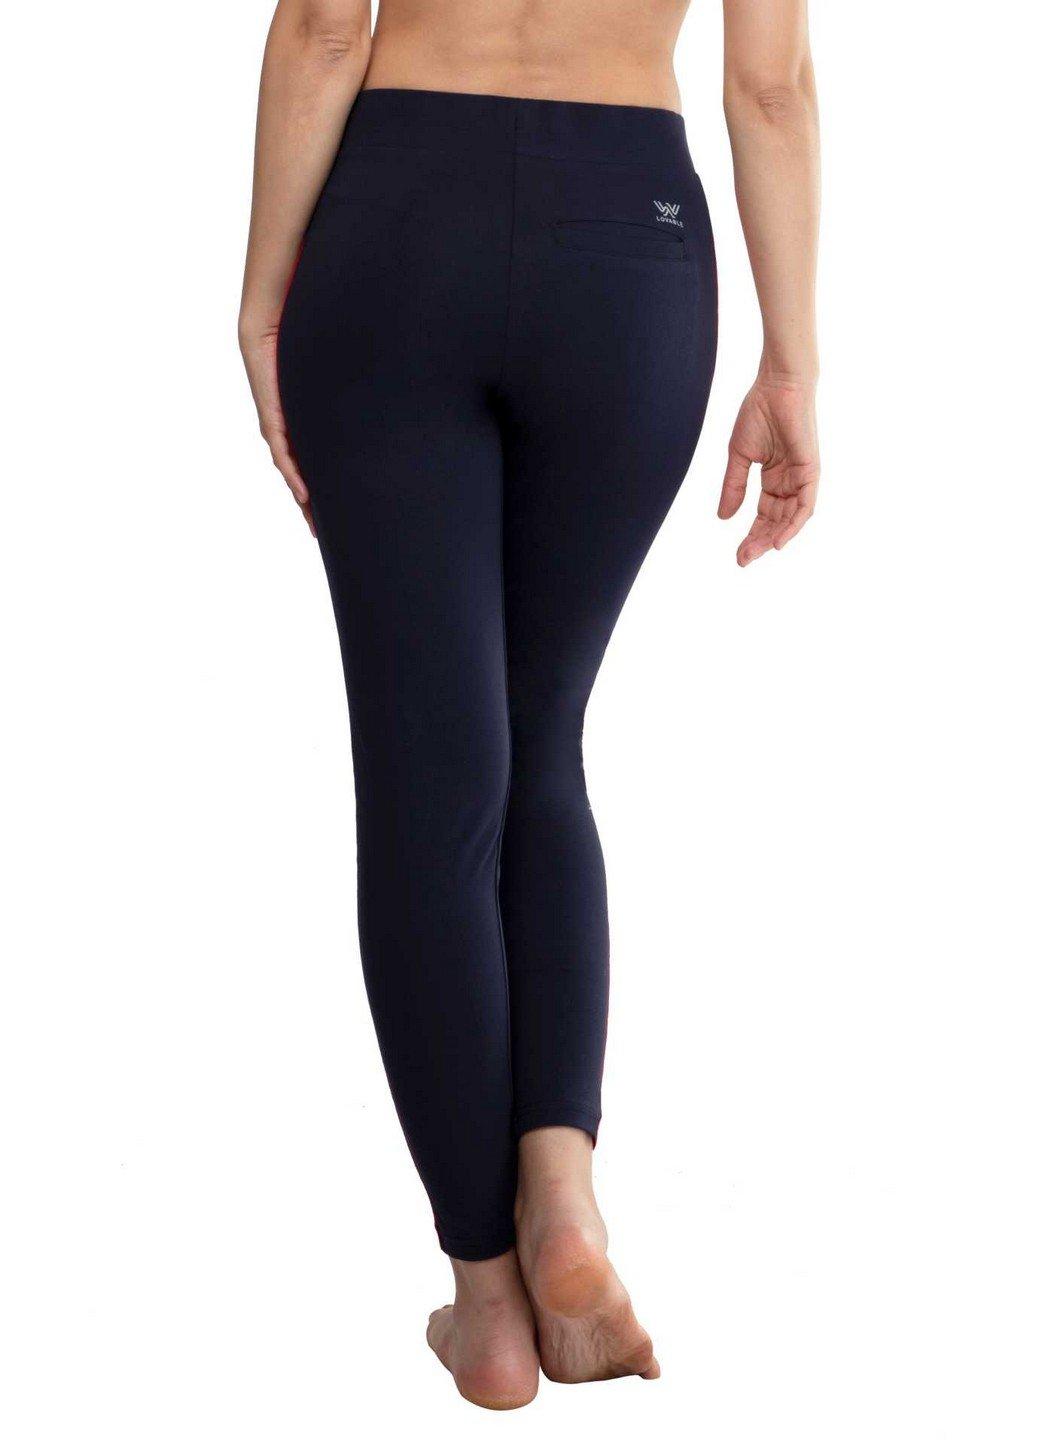 Lovable Black Cotton Gym Wear Tights Yoga Pants With Pocket